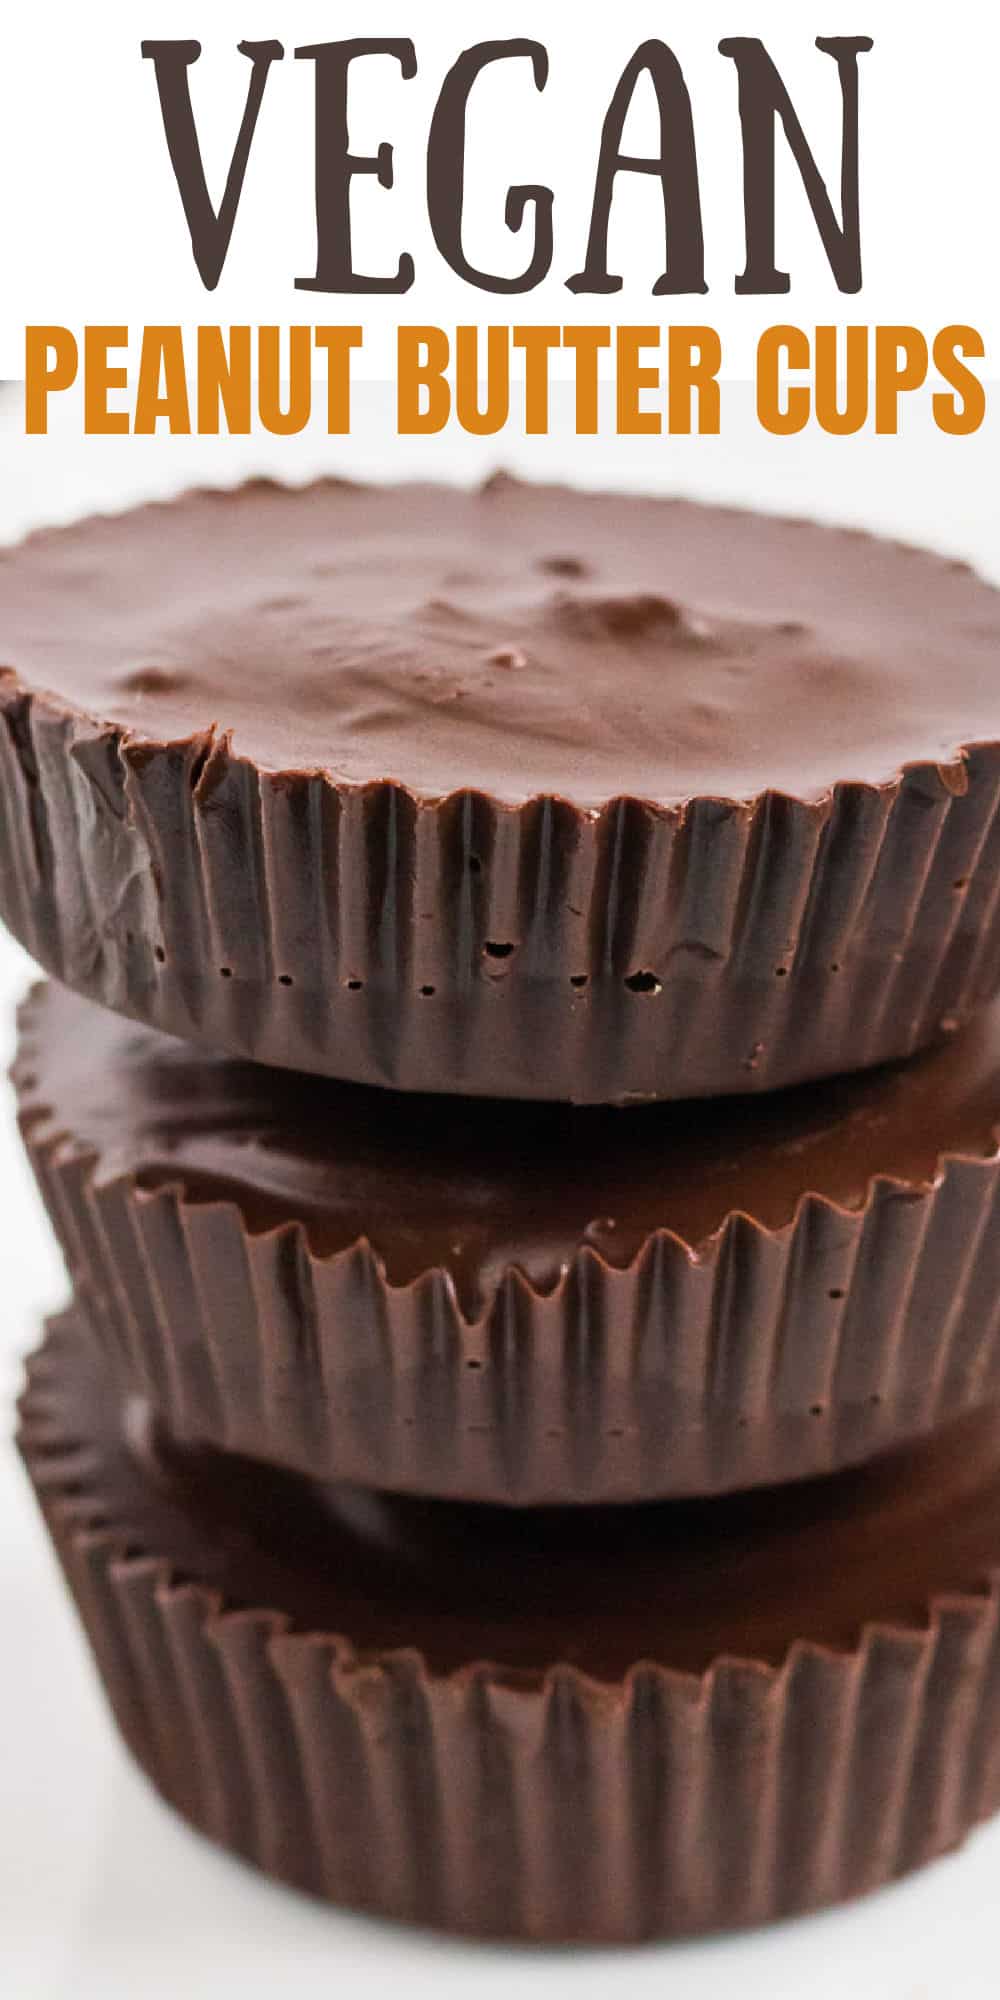 image with text "vegan peanut butter cups"